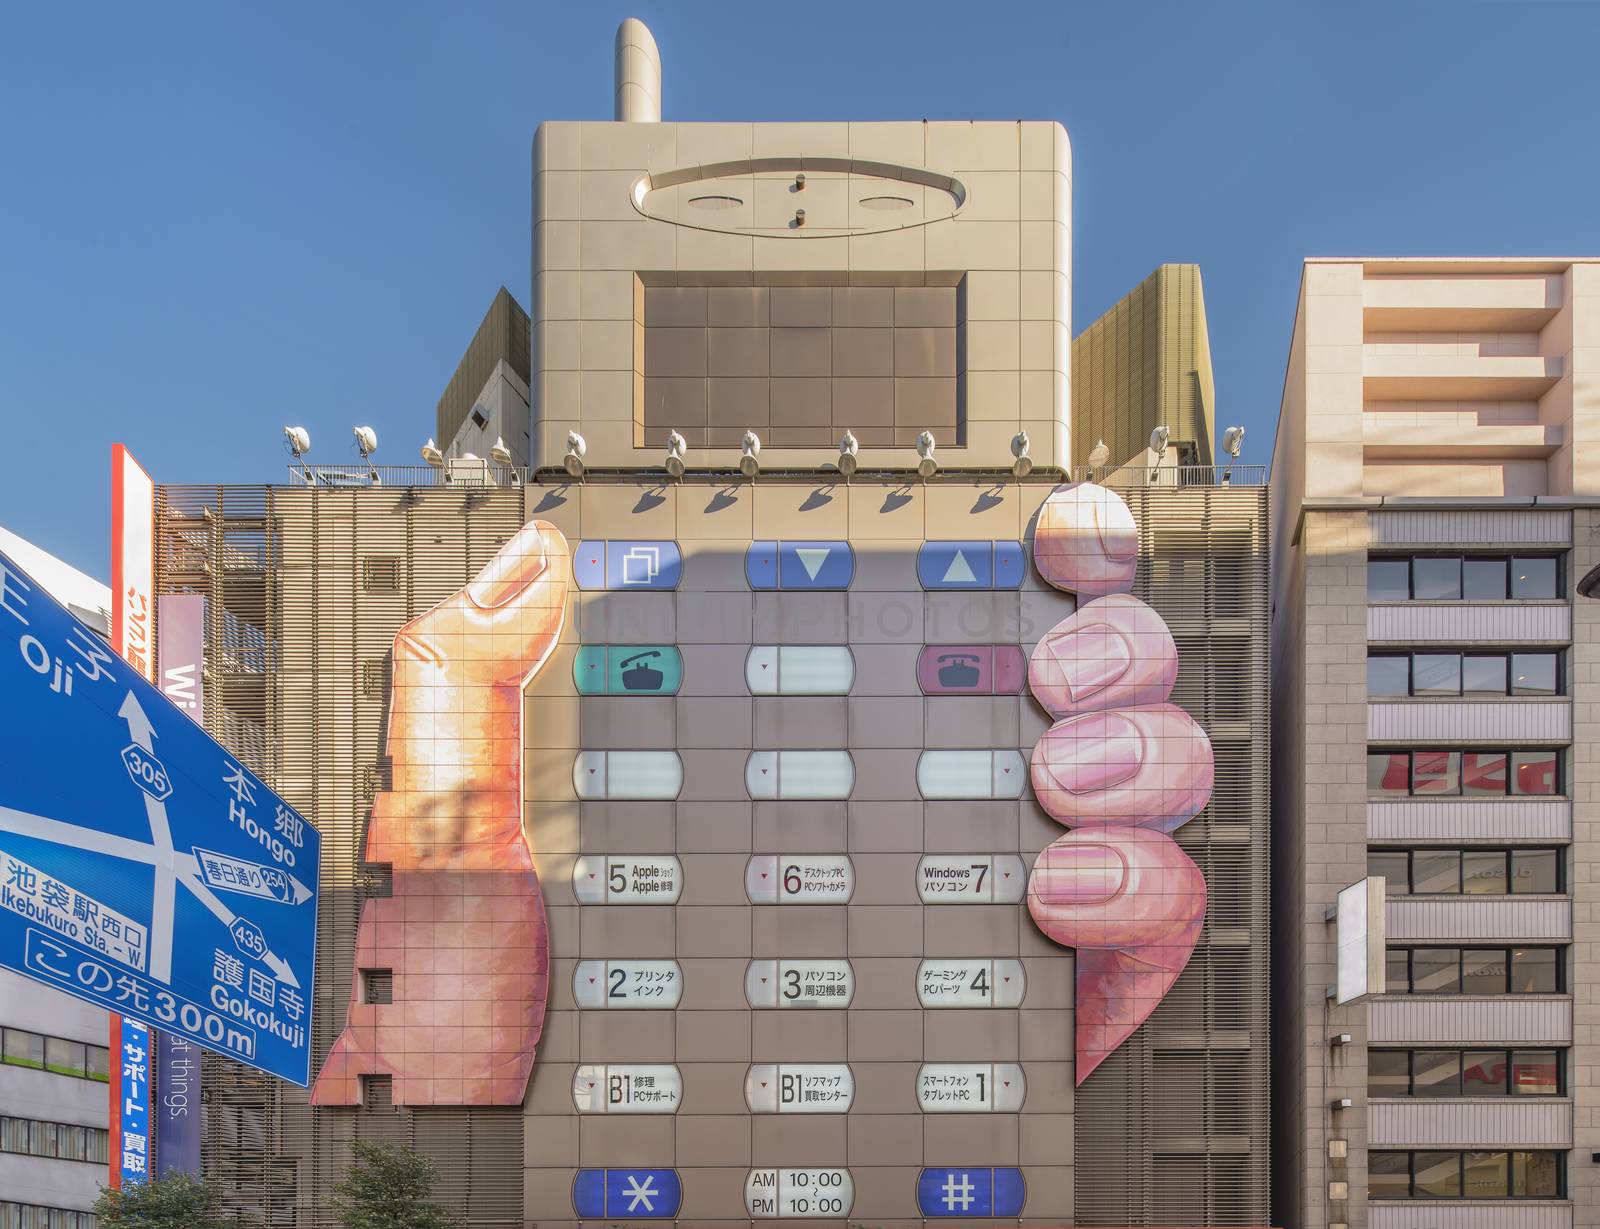 Building of a consumer electronics shopping center shaped in a form of a mobile phone held in one hand where the windows are button-shaped in Ikebukuro district north of Tokyo